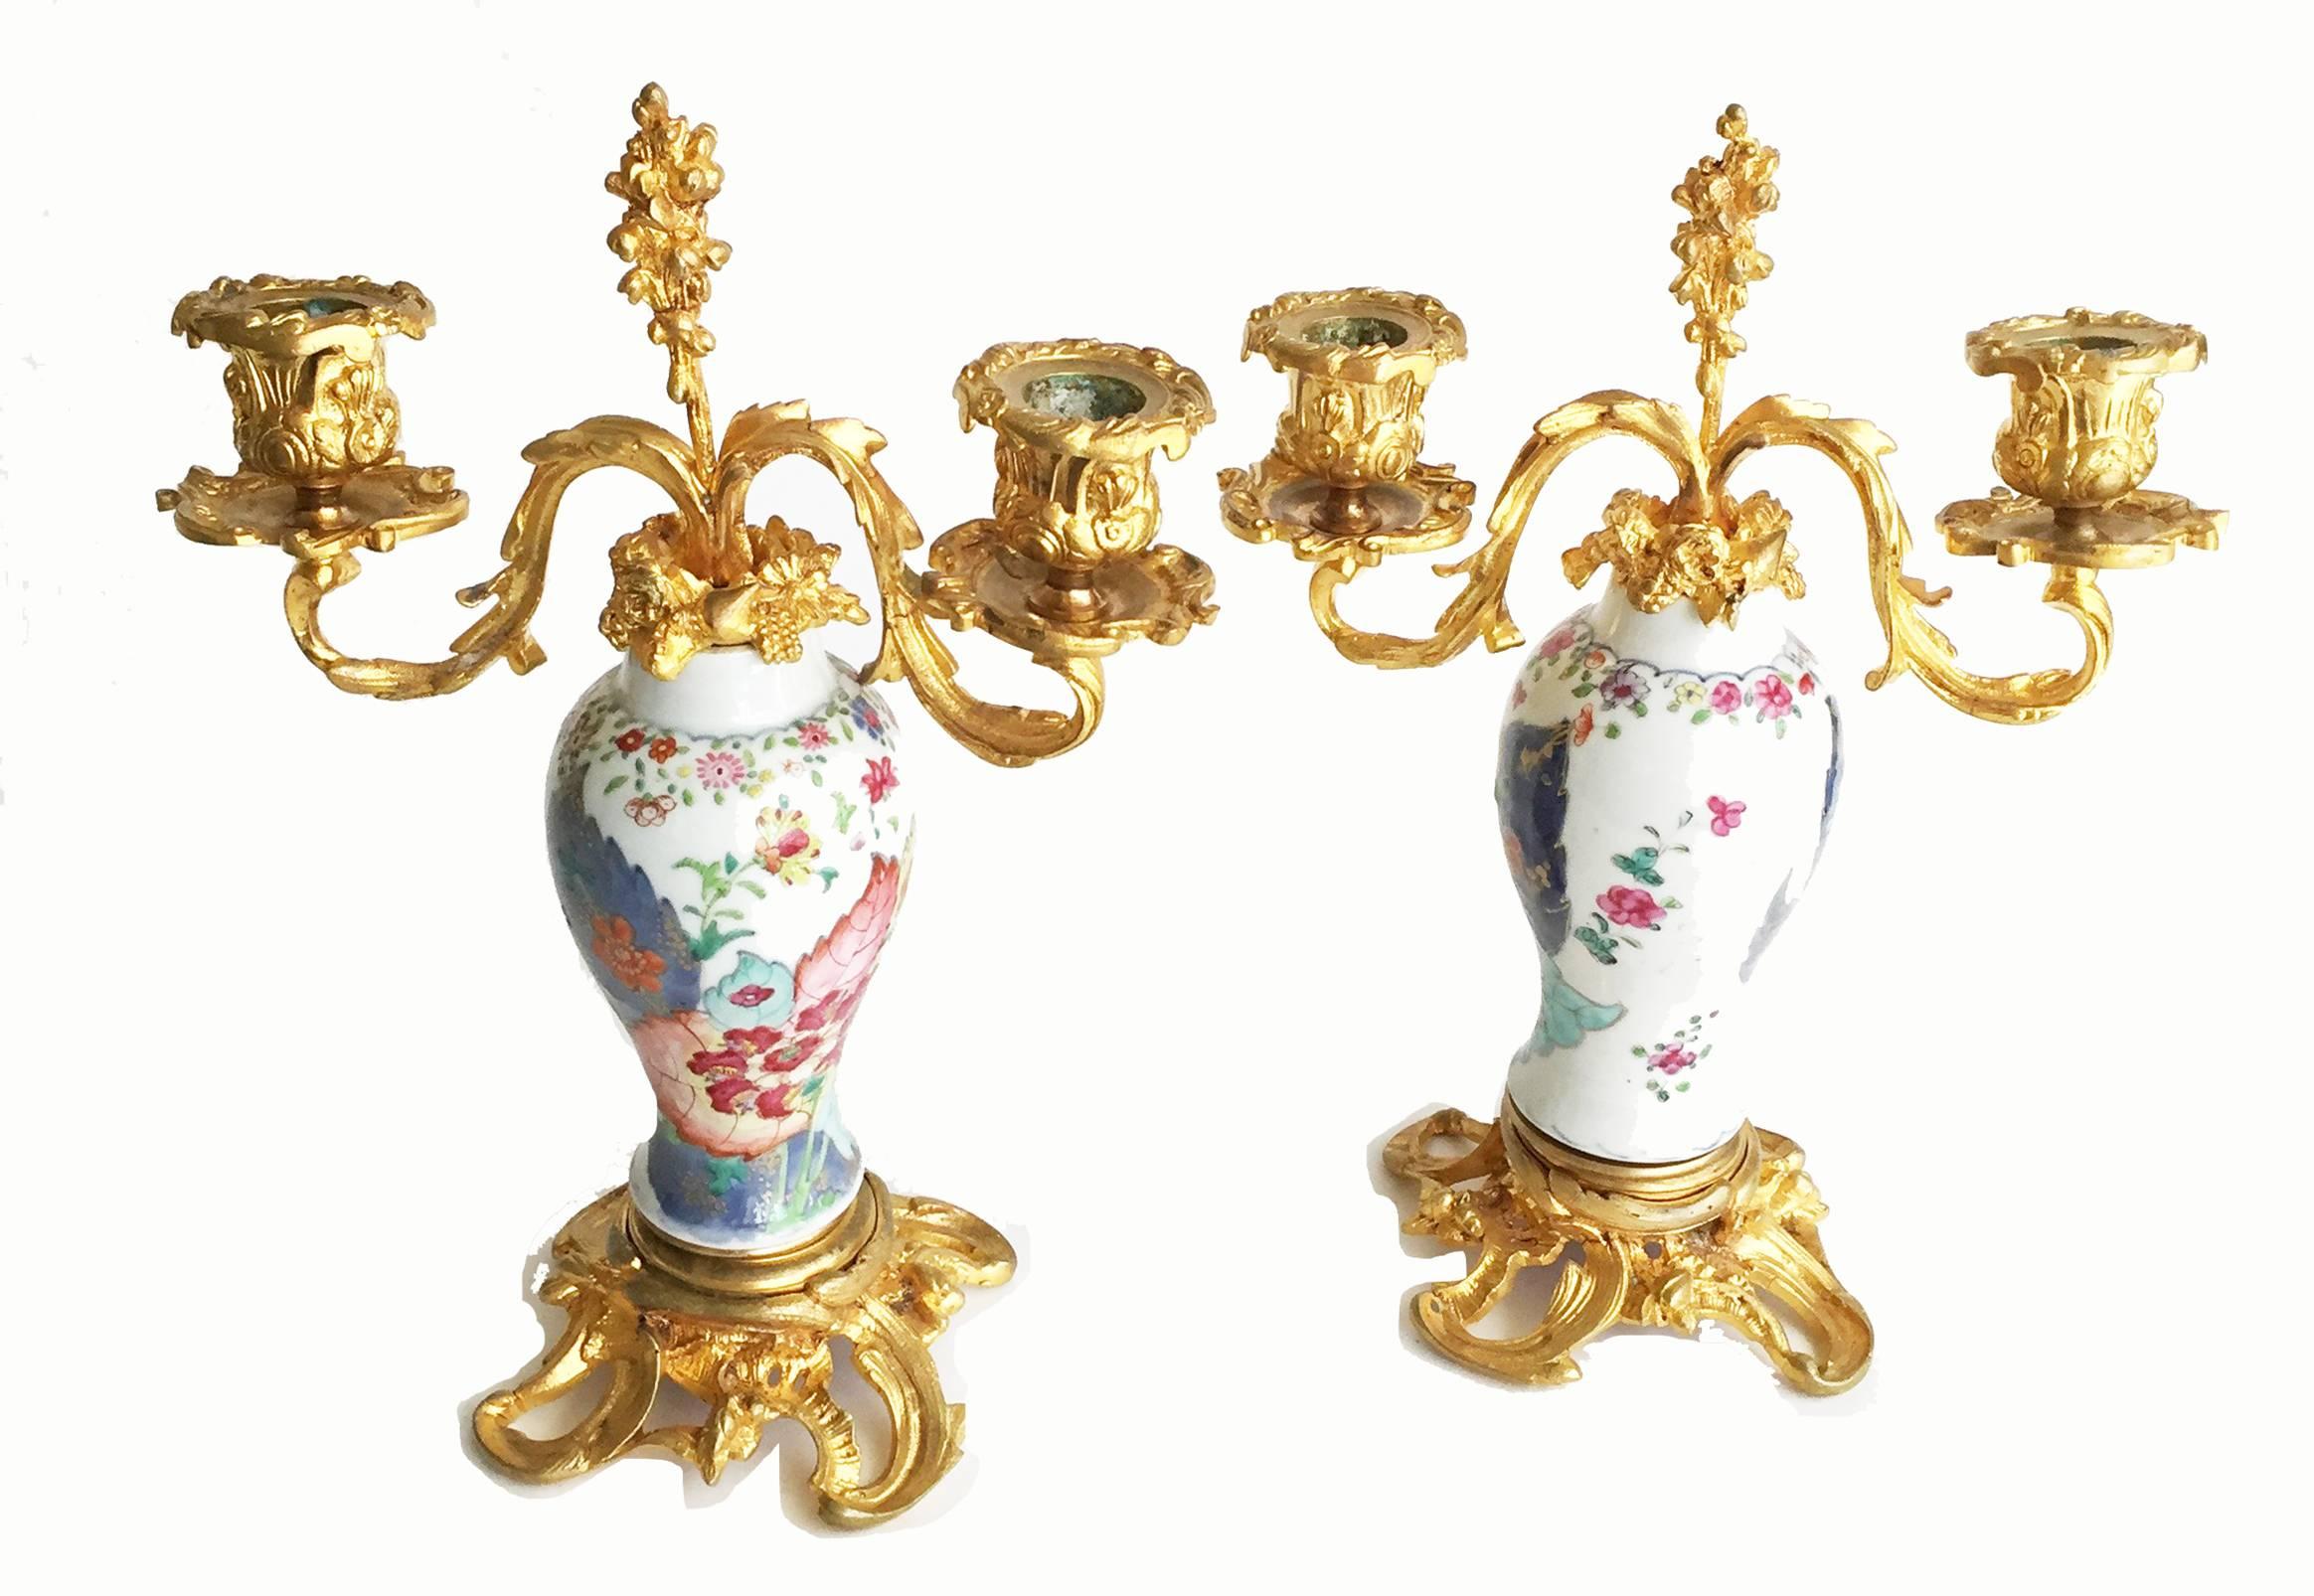 Rococo Chinese Export Porcelain and Ormolu-Mounted Two-Arm Candelabra For Sale